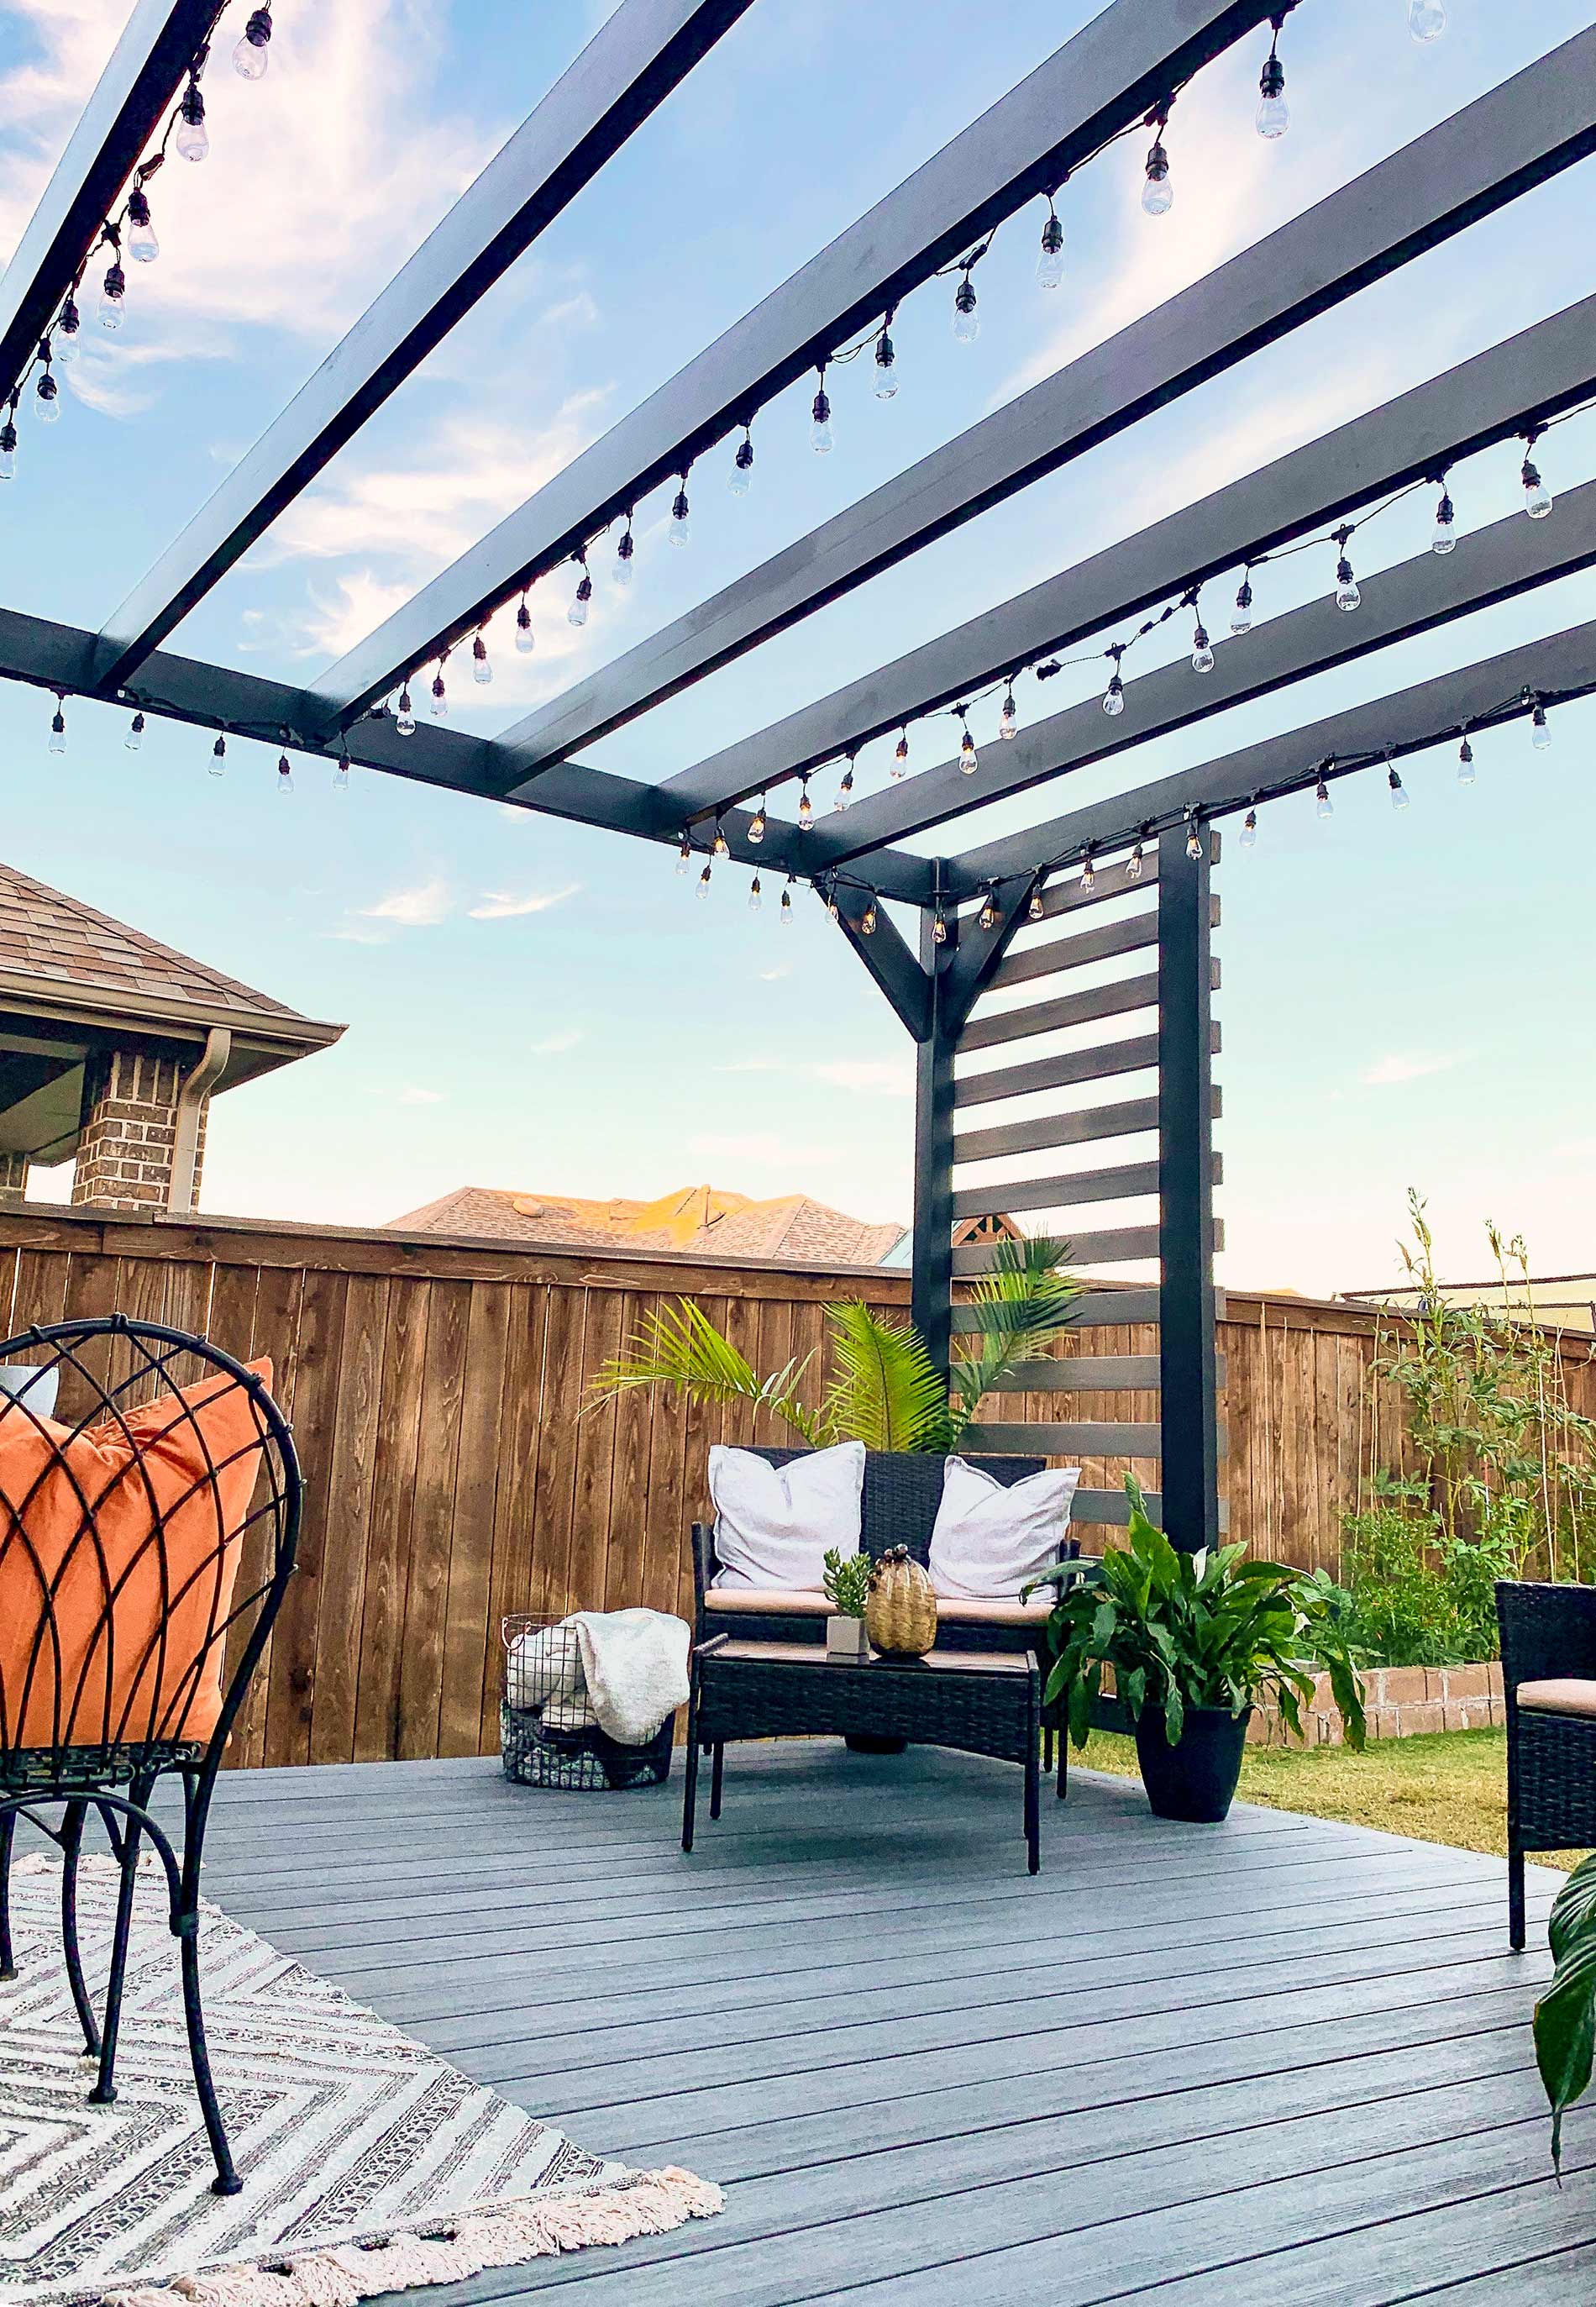 Pergola setting with deck furniture and string lights